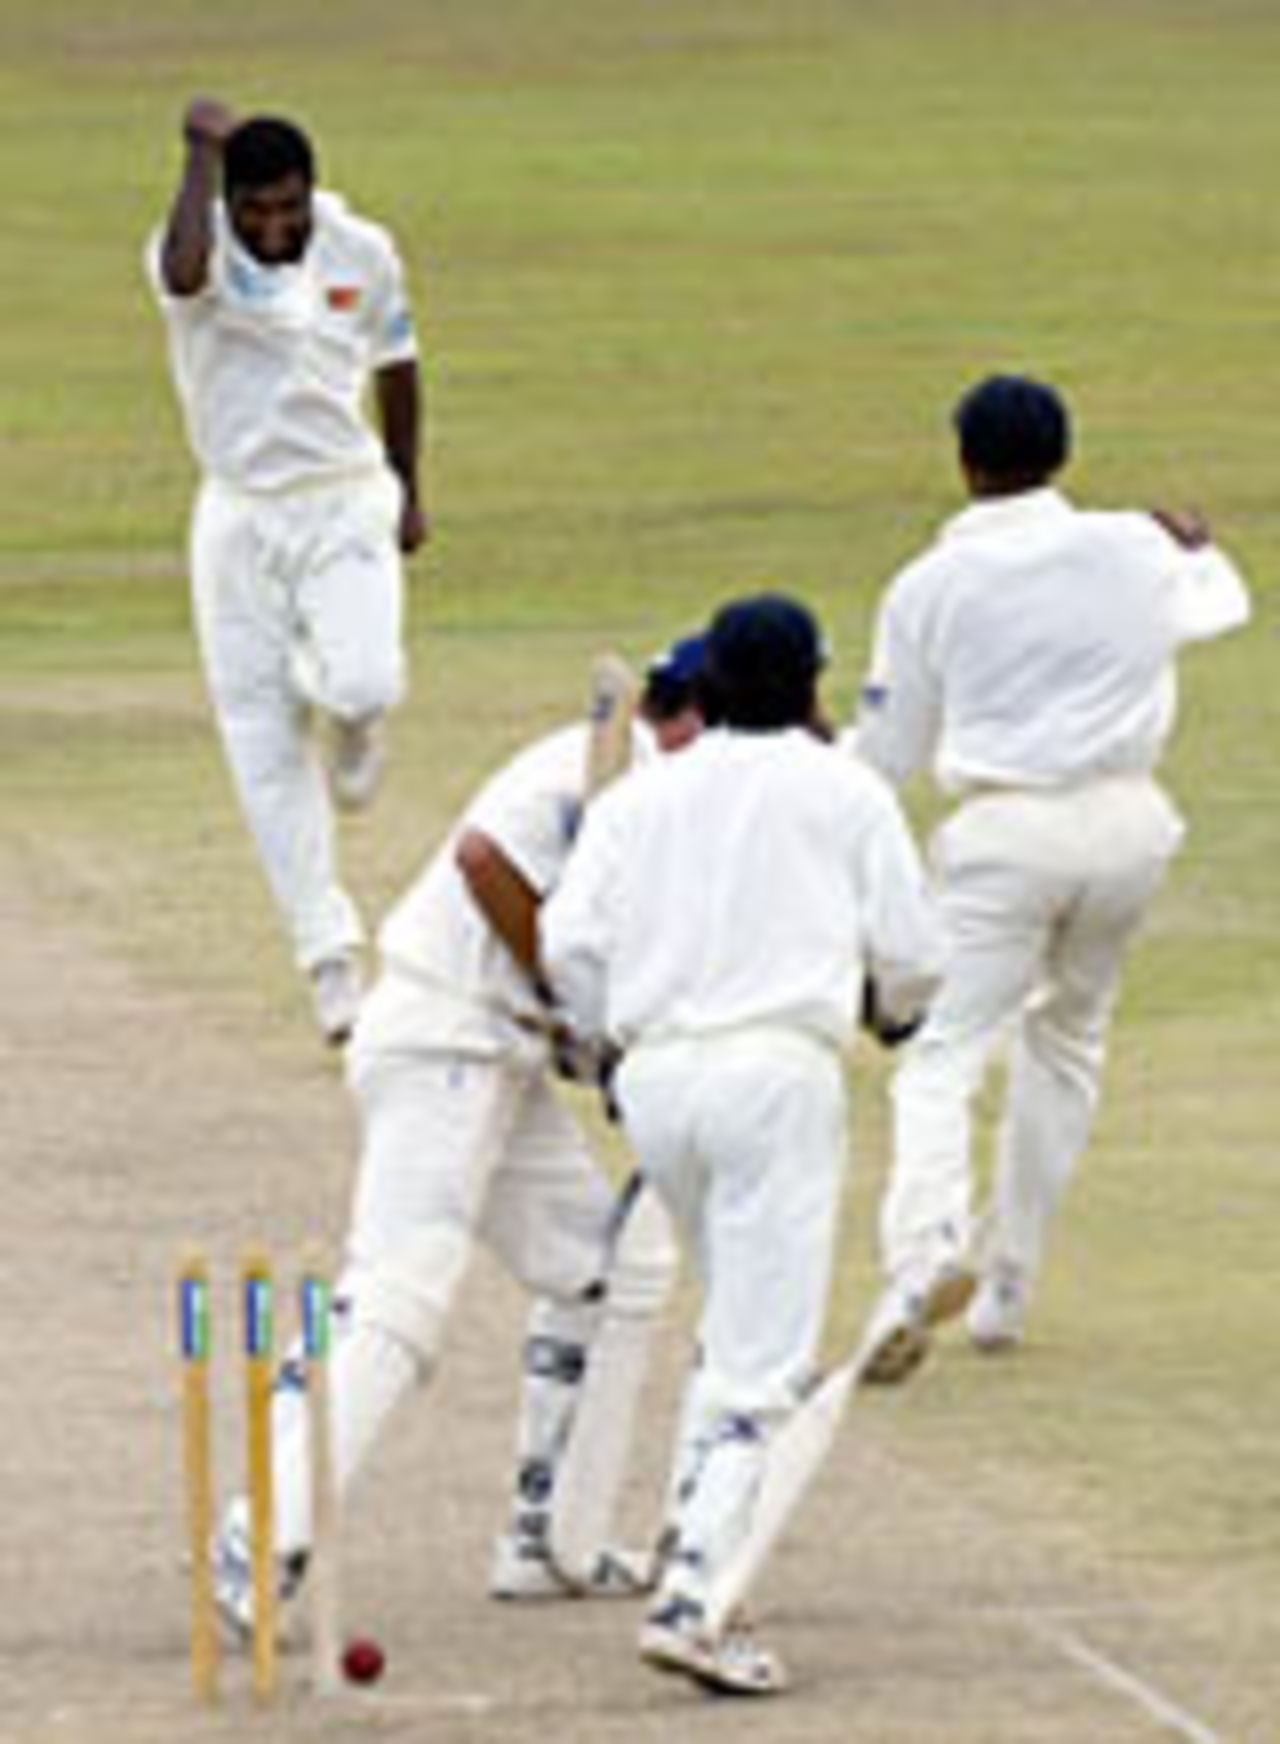 Michael Vaughan is bowled shouldering arms to Muttiah Muralitharan, Sri Lanka v England, 1st Test, Galle, December 3, 2003